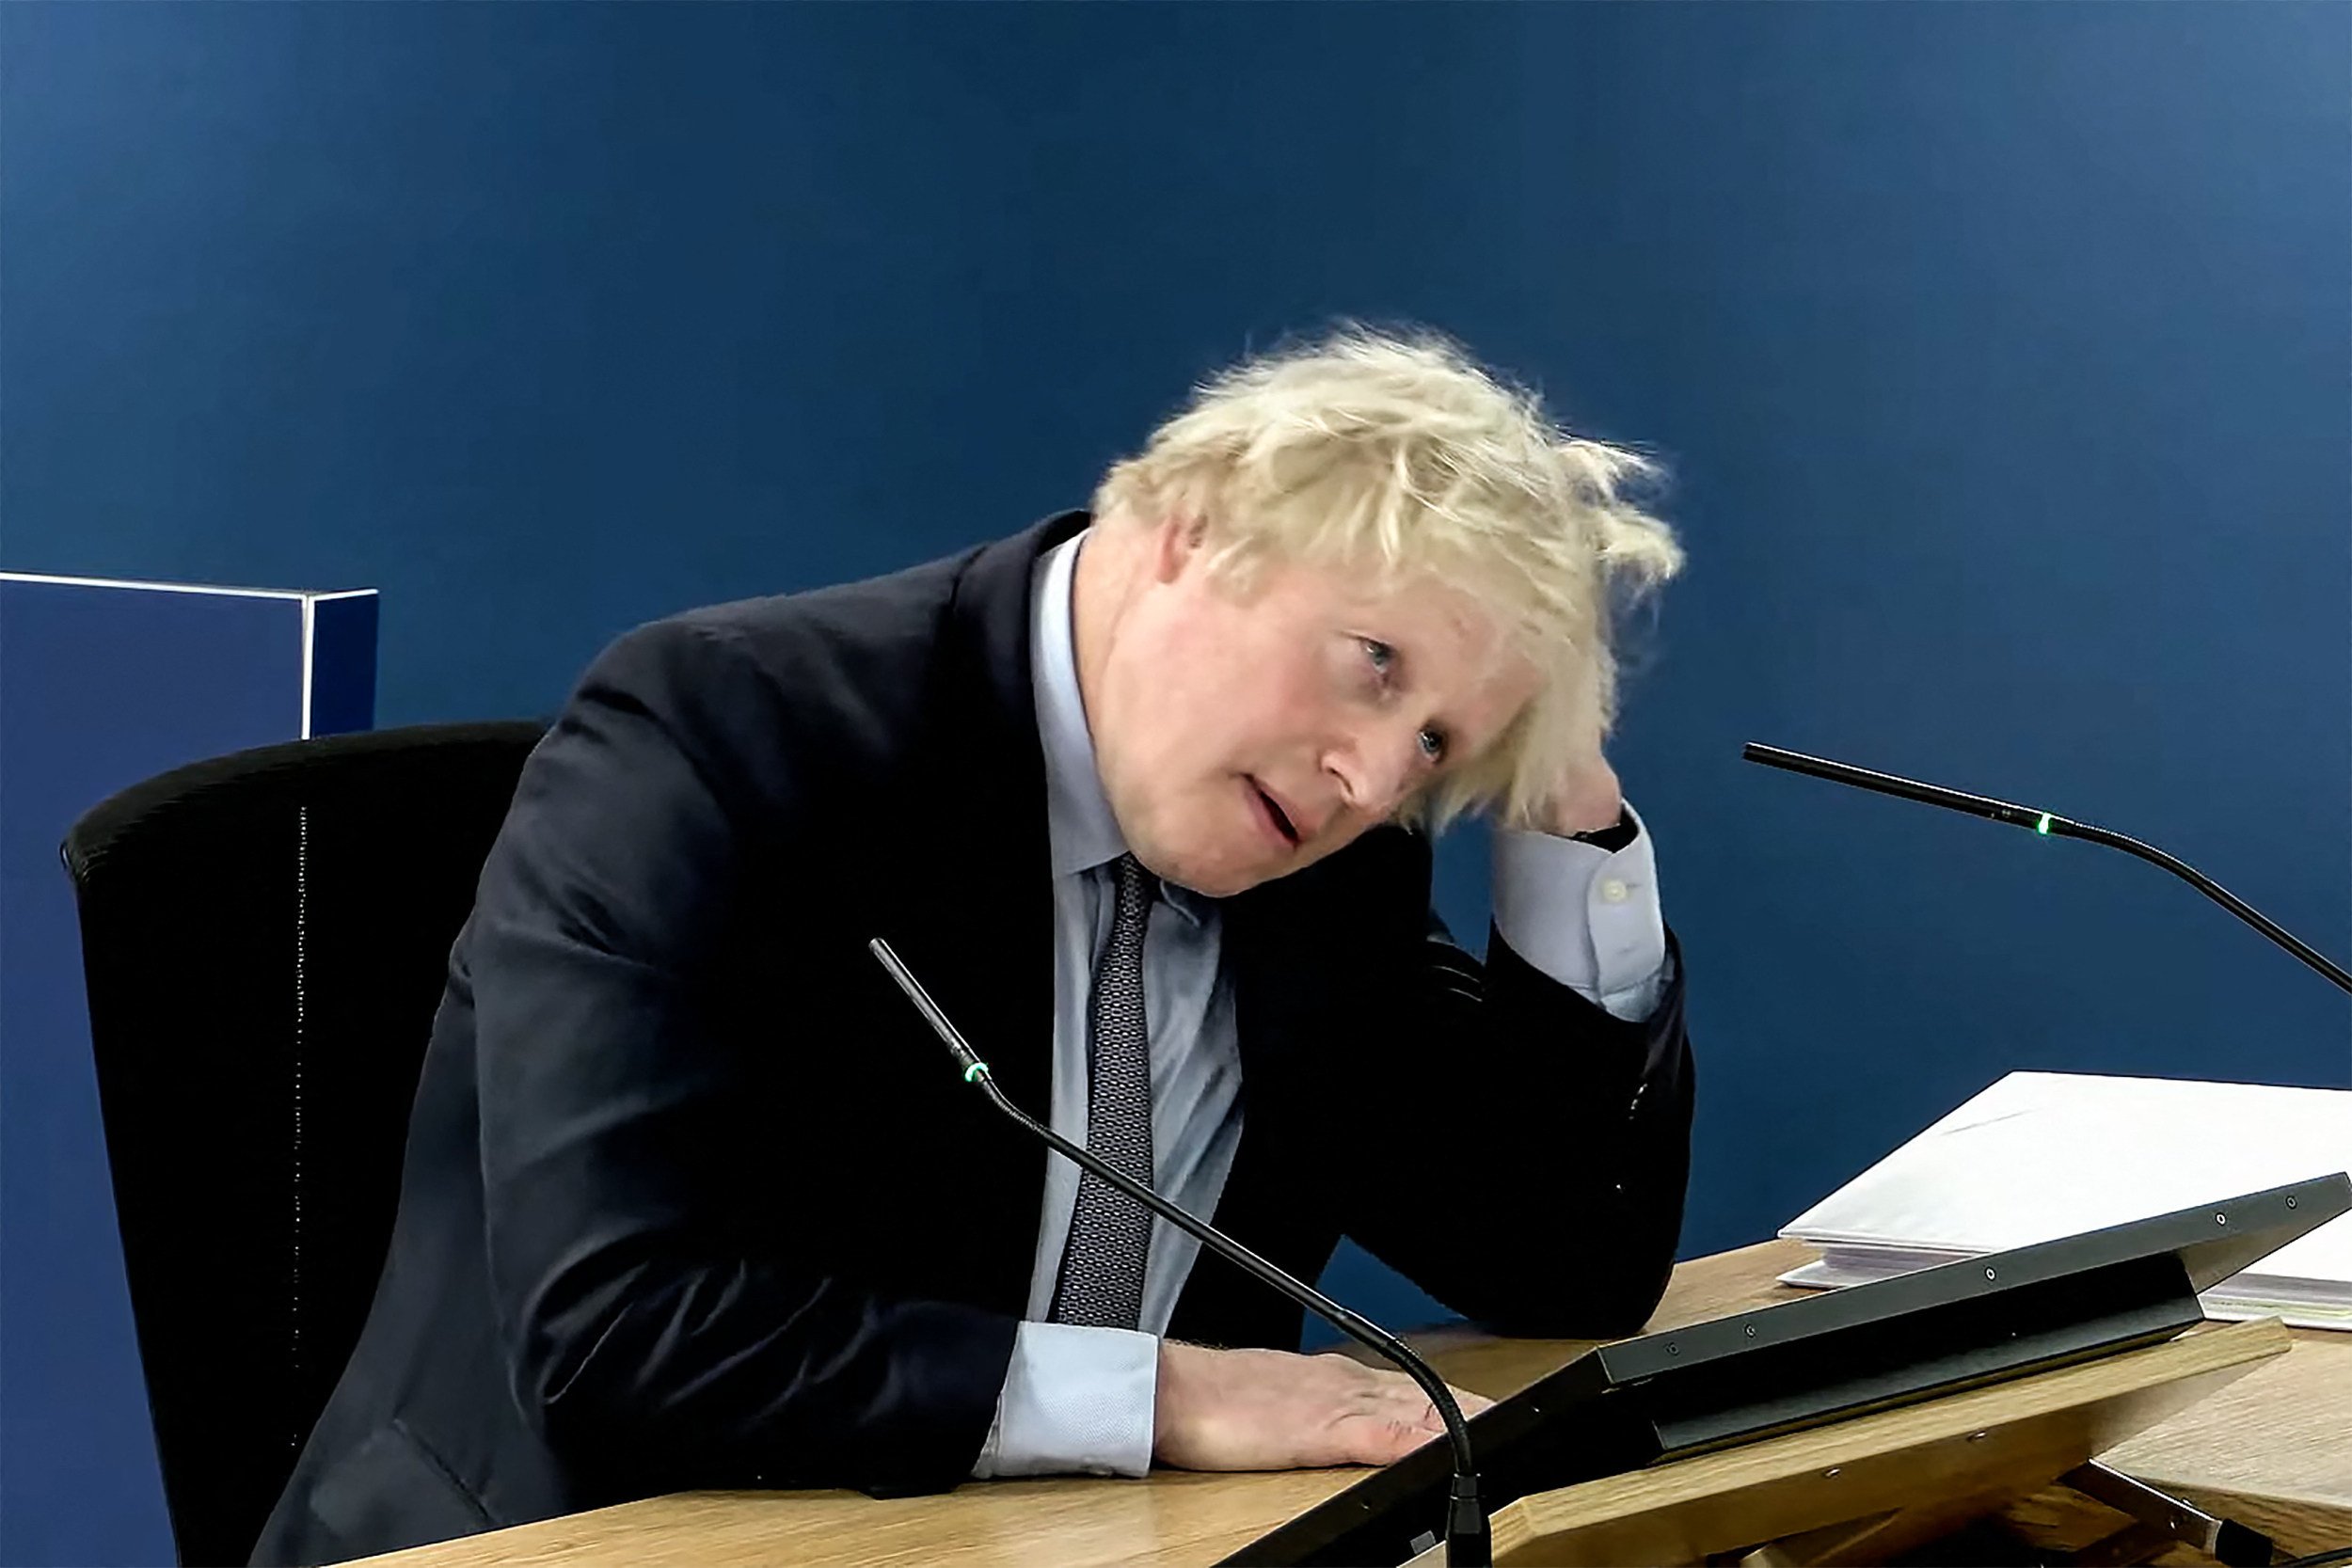 Britain’s former Prime Minister Boris Johnson gives evidence at the UK Covid-19 Inquiry. Photo: UK Covid-19 Inquiry/AFP